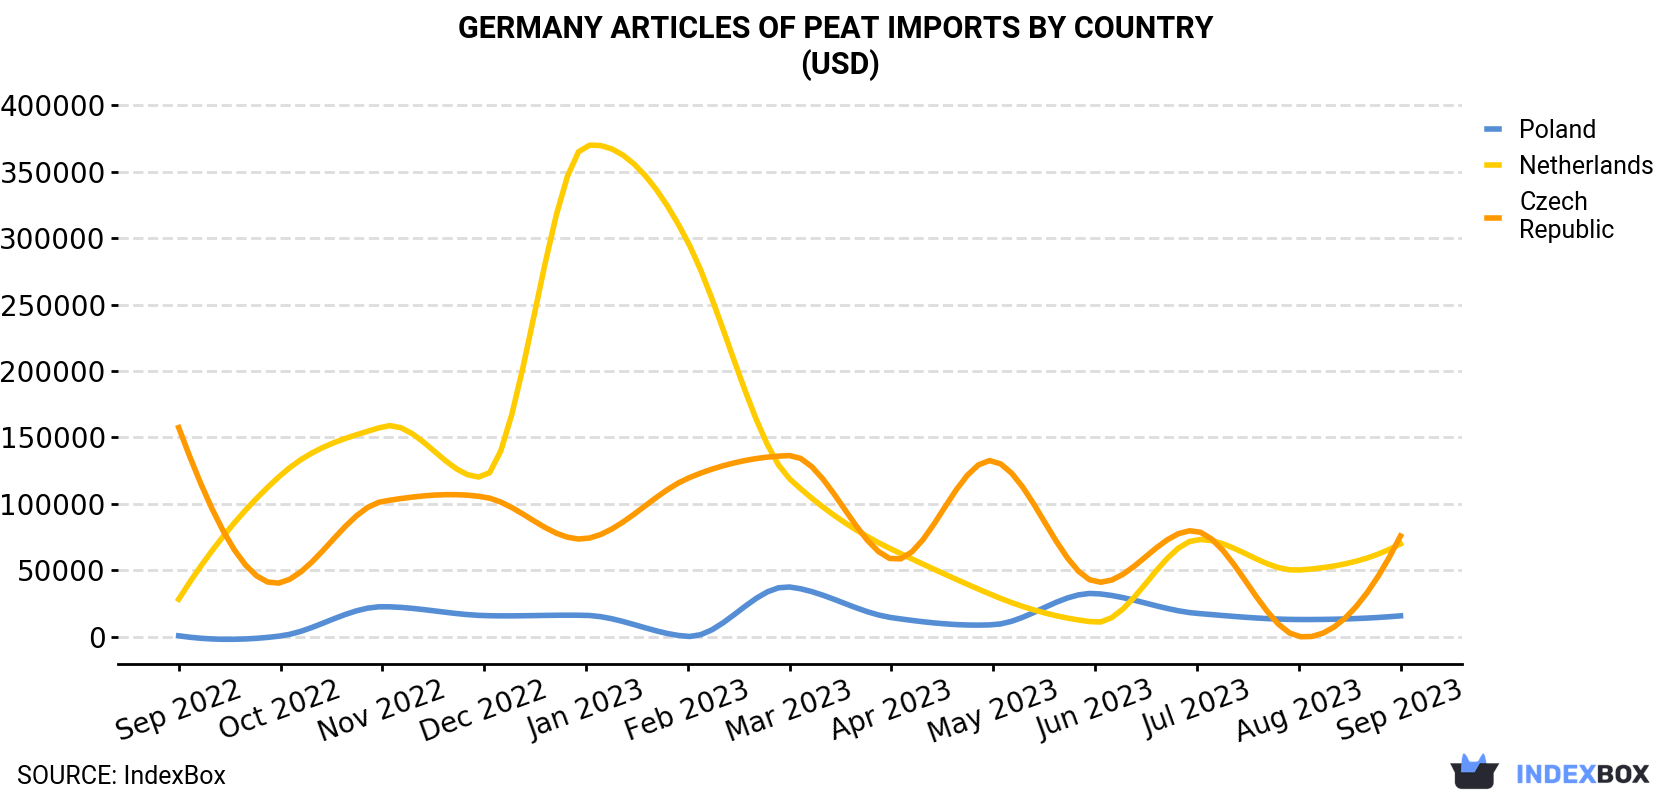 Germany Articles Of Peat Imports By Country (USD)